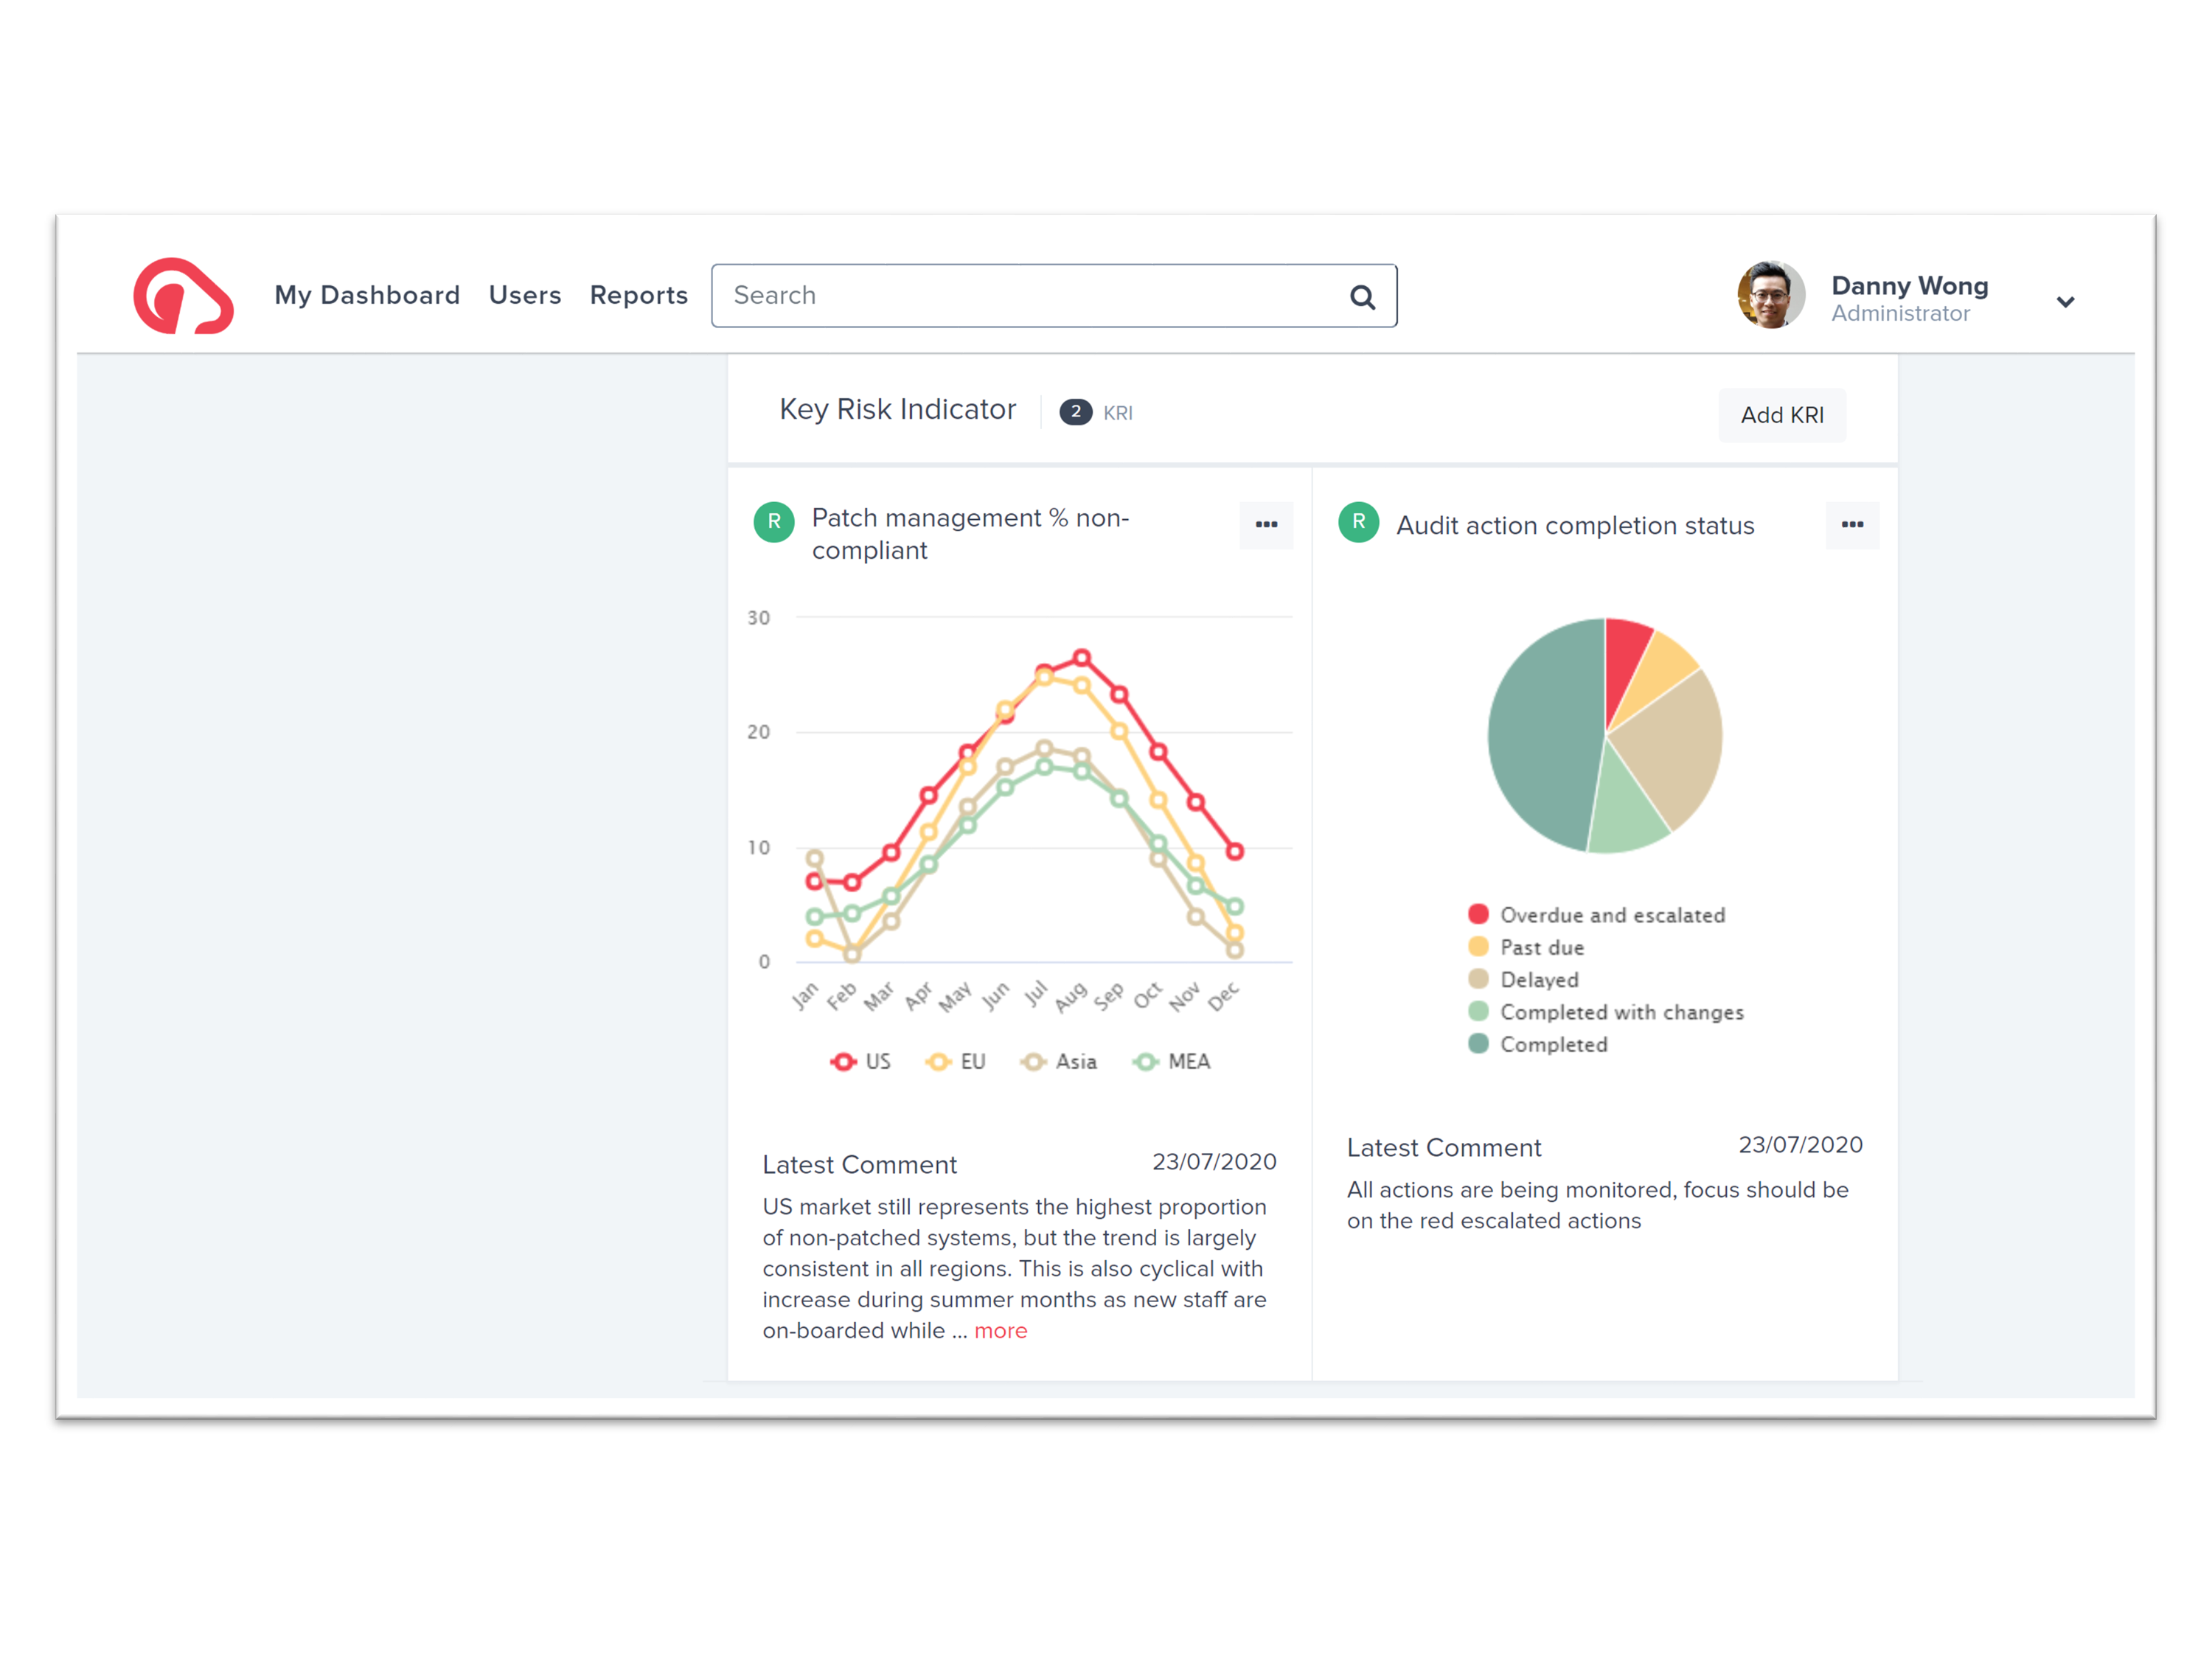 Key Risk Indicator Tracking - Connect business metric risks to enable a data-led, performance management approach combined with the risk narrative and actions. A huge step forward in terms of the value of risk management.